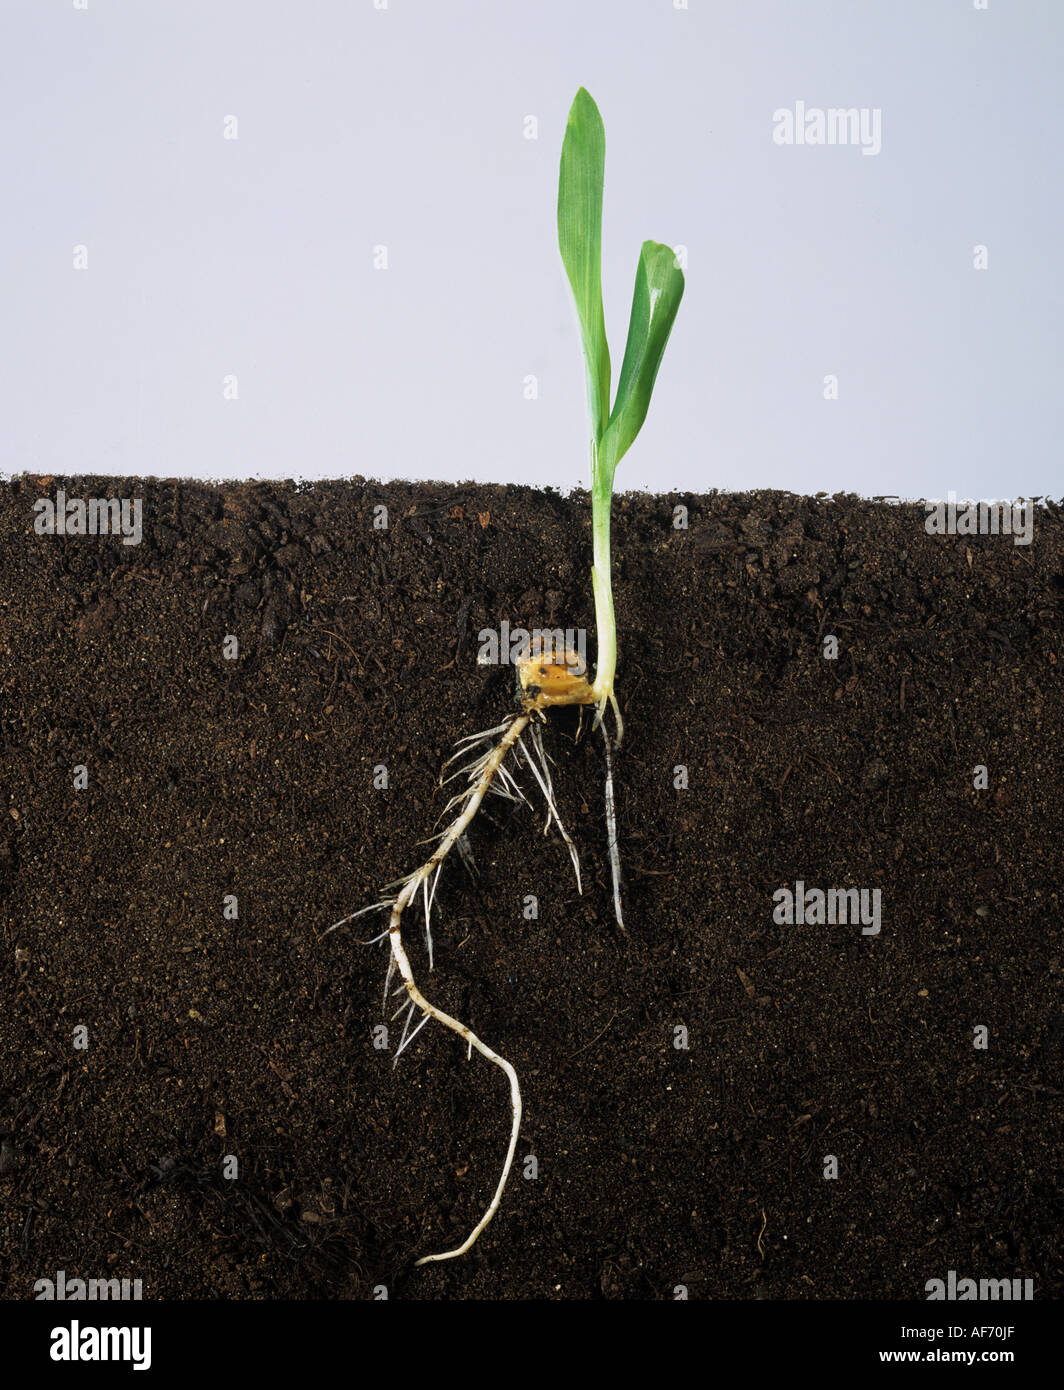 Maize or corn seedling with two leaves growth stage 12 and roots Stock Photo